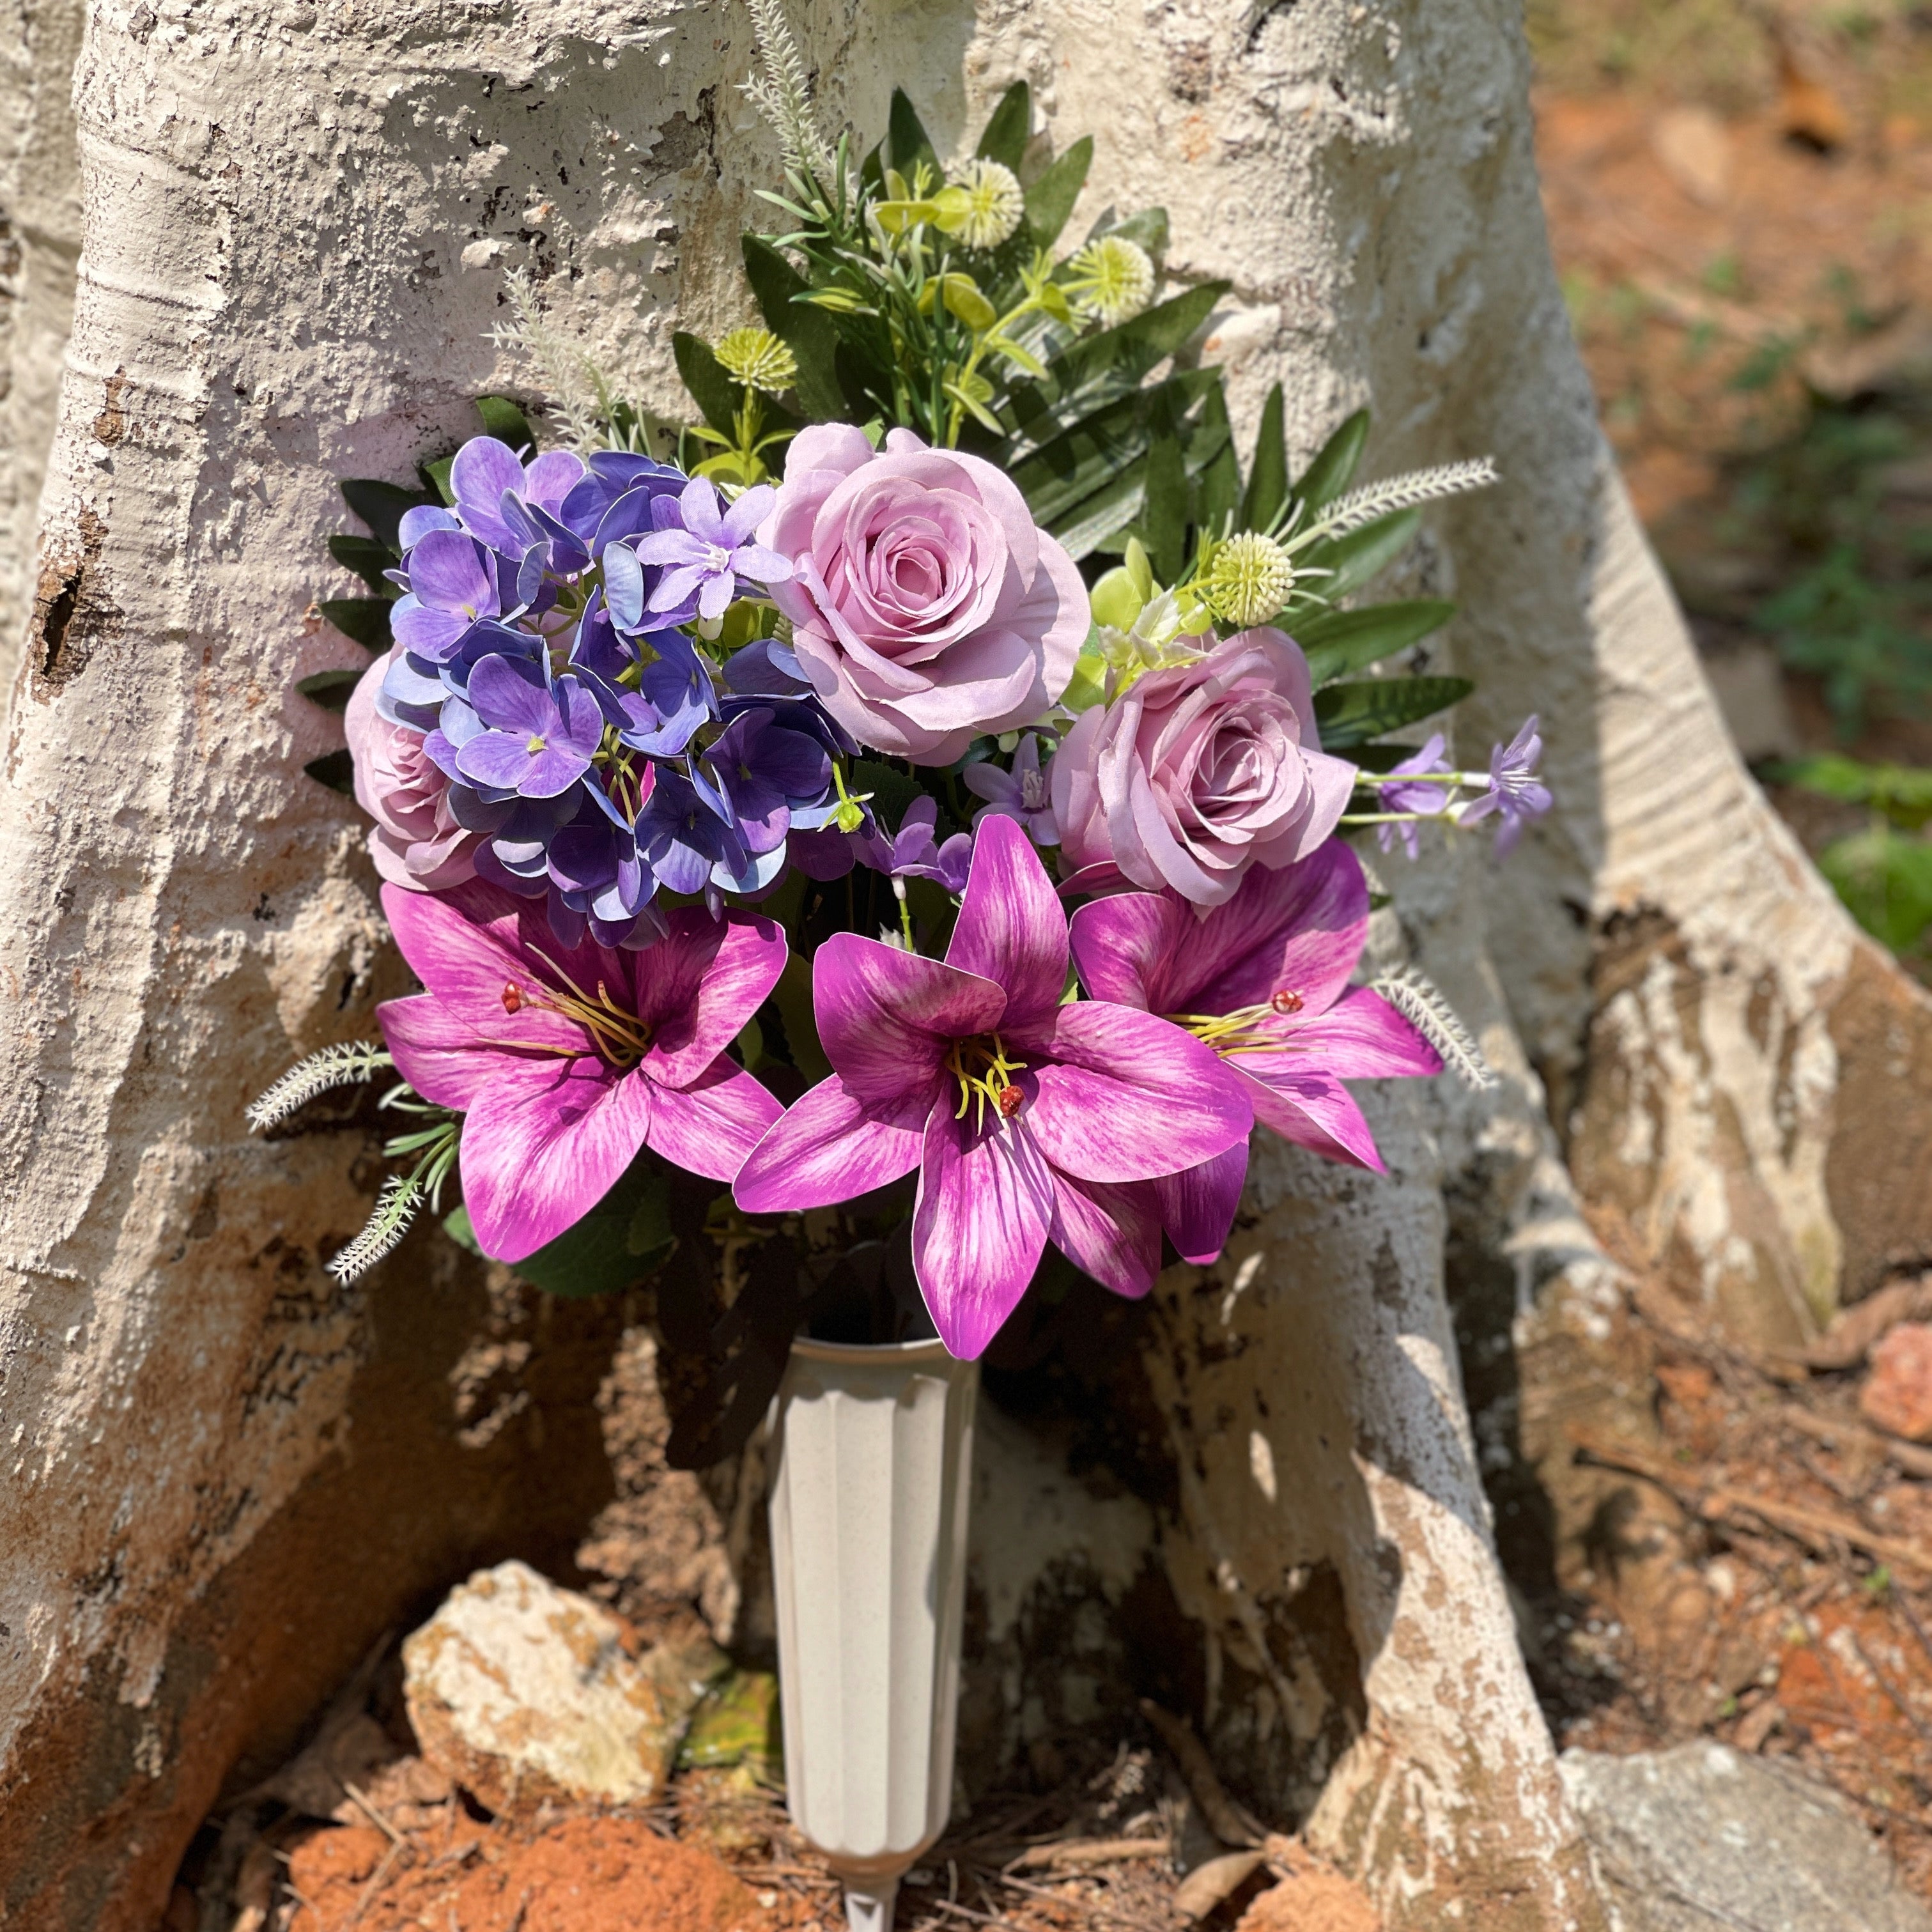 Bulk Artificial Cemetery Flowers with Vase Stake Memorial Graveyard Flowers for Outdoors Wholesale